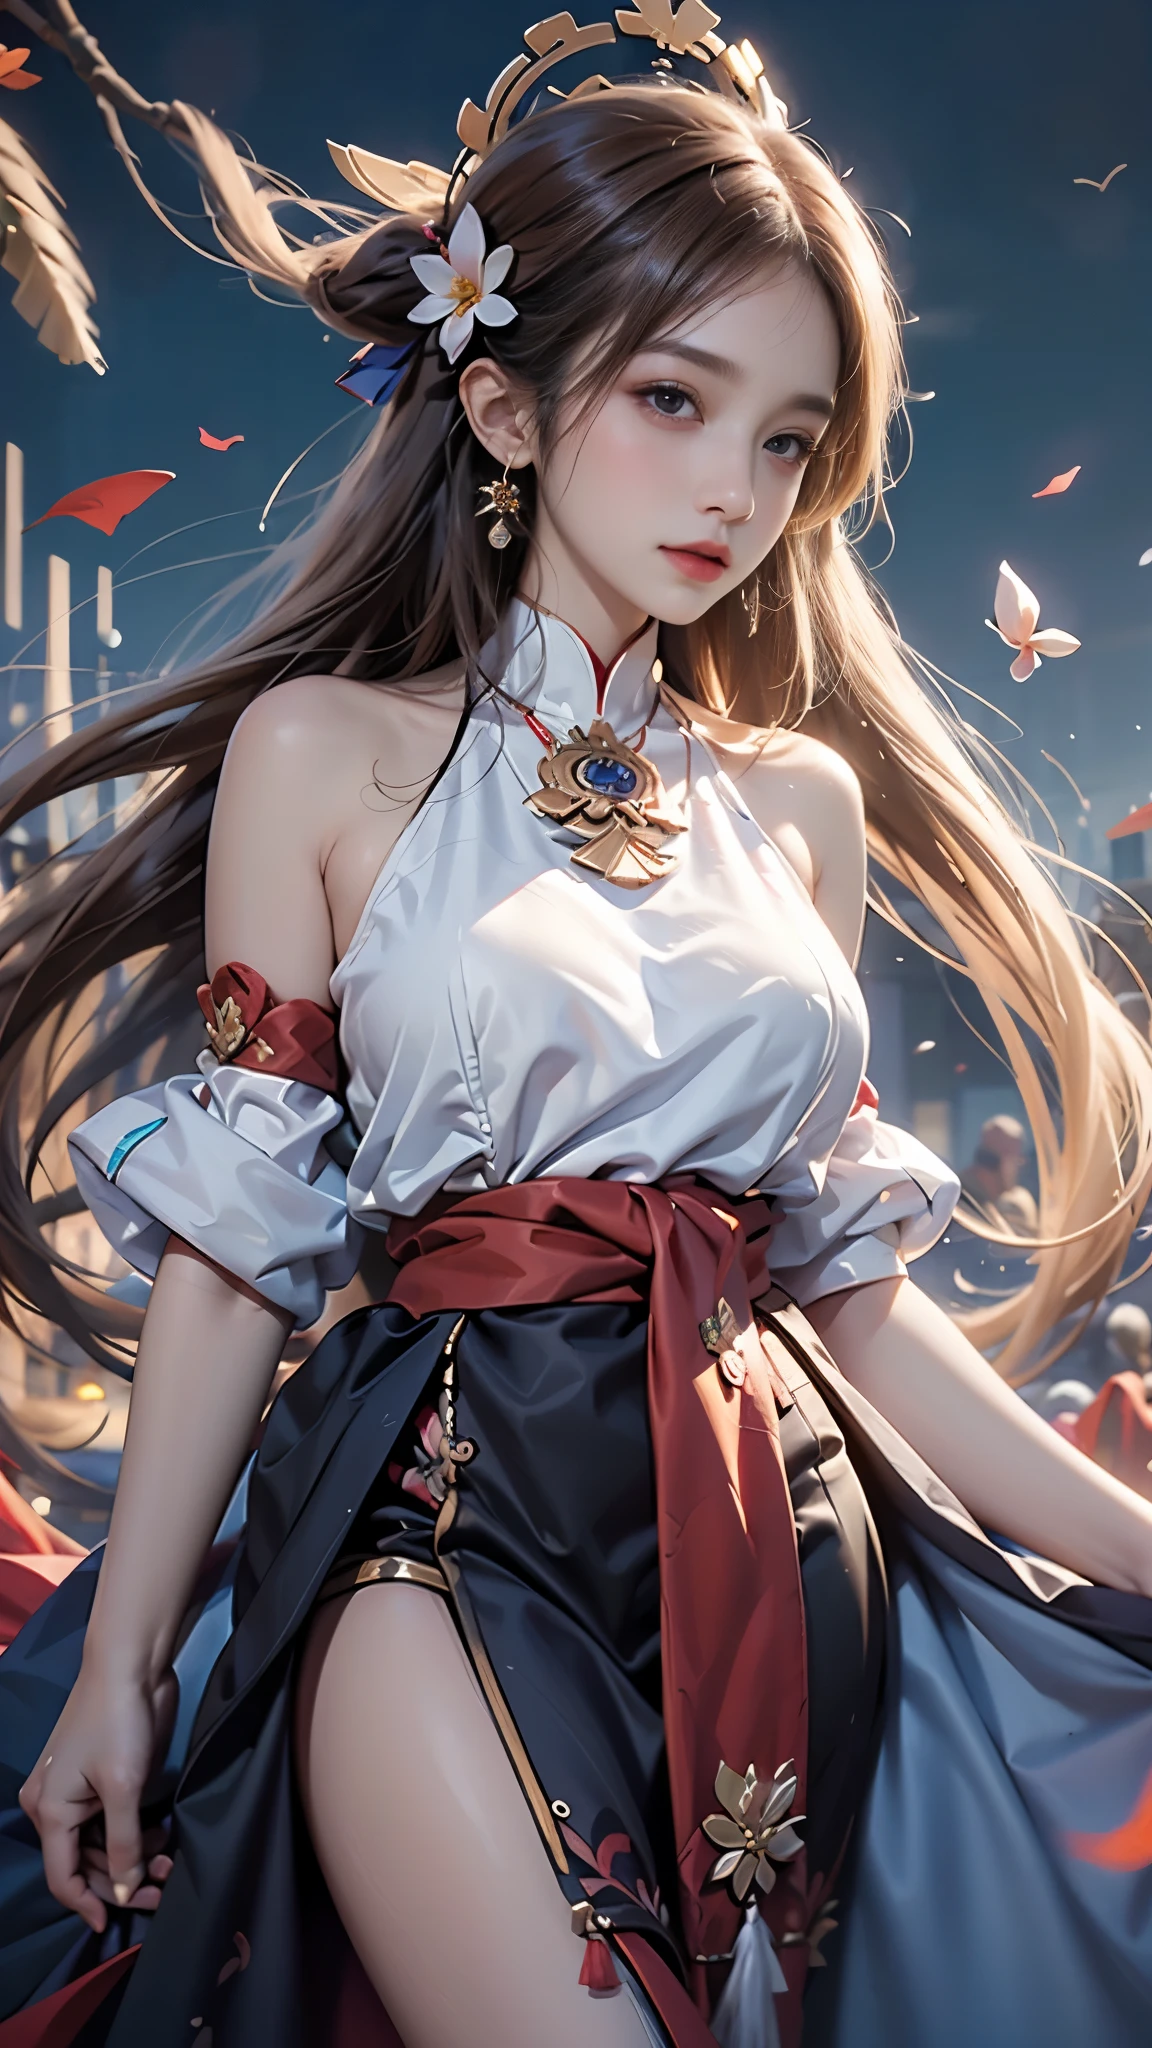 yae_miko, masterpiece，best quality，high quality，High definition，high quality的纹理，high quality的阴影，High details，Beautiful details，fine details，Extremely detailed CG，Detailed texture，lifelike面部表现，lifelike，colorful，Beautifully，sharp focus，(intricate details，Pure love face_v1:0.5)，(Beautifully face with beautiful details，(Beautifully eyes)，Perfectly proportioned face，HighSkin details，Skin details，The optimal ratio of four fingers to one thumb，emaciated:1.3)，1 girl，17 years old，High，(Smooth abdominal muscles:1.55)，(abdominal muscles:0.5)，beautiful，perfect，High，((Big breasts, big breasts, big breasts)), ((bare shoulders)), ((The skirt is very short)), (long legs)，(straight legs)，(thin waist)，((White skin))，White skin，((White skin))，(Emma Watson)，big breasts，((Caucasian))，Light blonde hair，Stand with your legs apart，looking at the audience，whole body，Portrait of cute blonde girl，((Standing in the wheat field,look into the distance))，bloom，orange mist，kinetic，strands of hair，lifelike，high quality渲染，amazing art，high quality，Film texture，Fuji XT3，dream